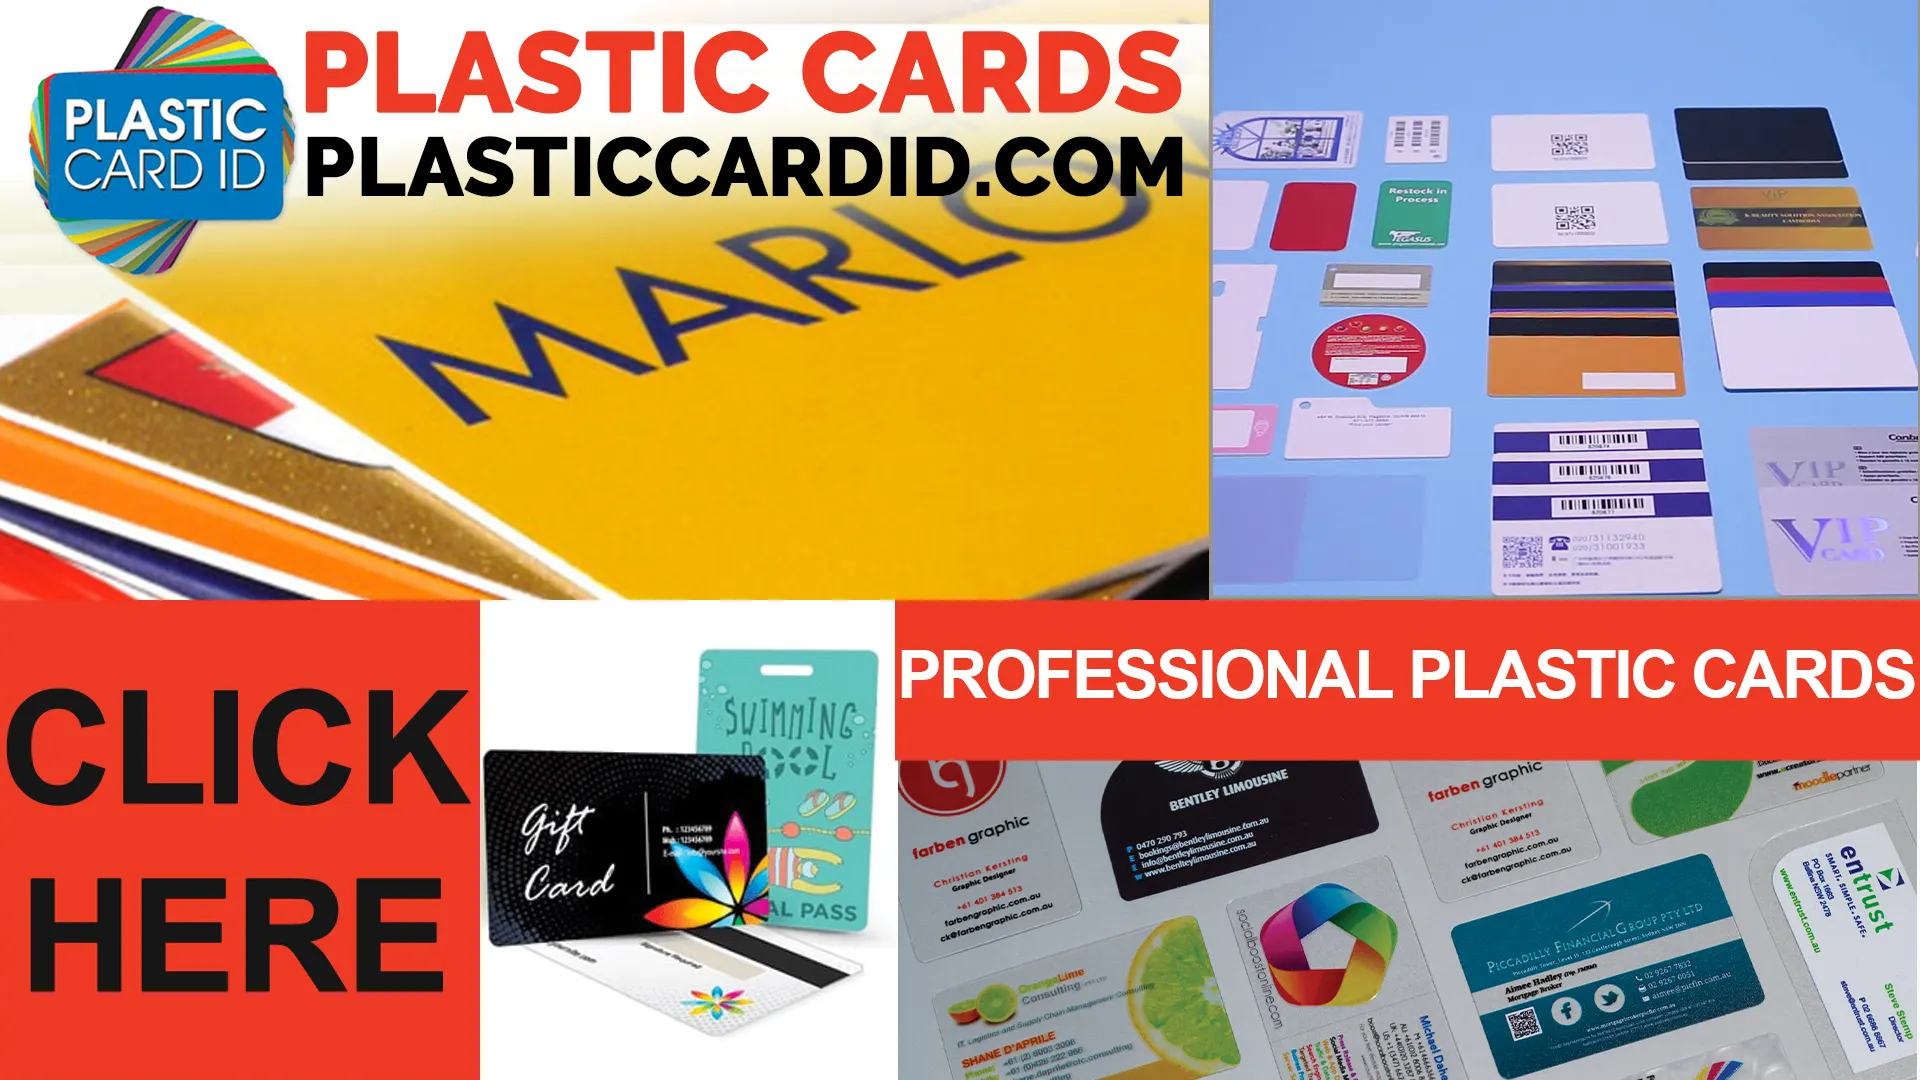 The Eco-Friendly Benefits of Plastic Cards